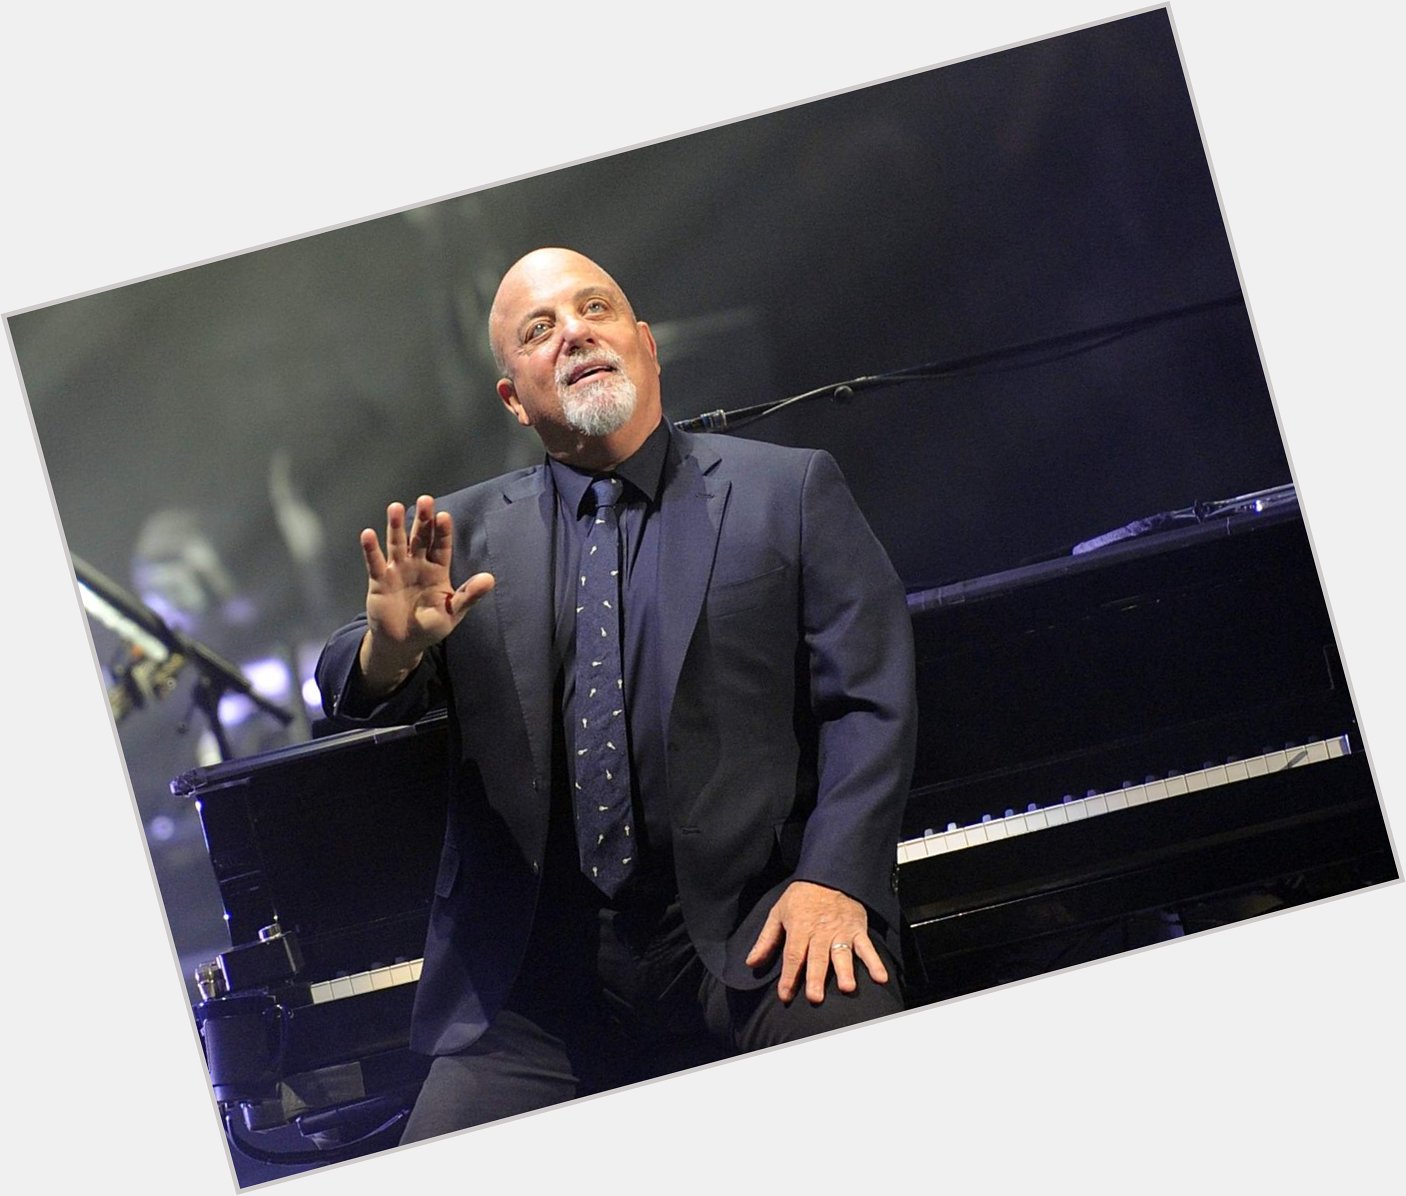 Happy 68th birthday to my artist and a god among gods, Billy Joel! 